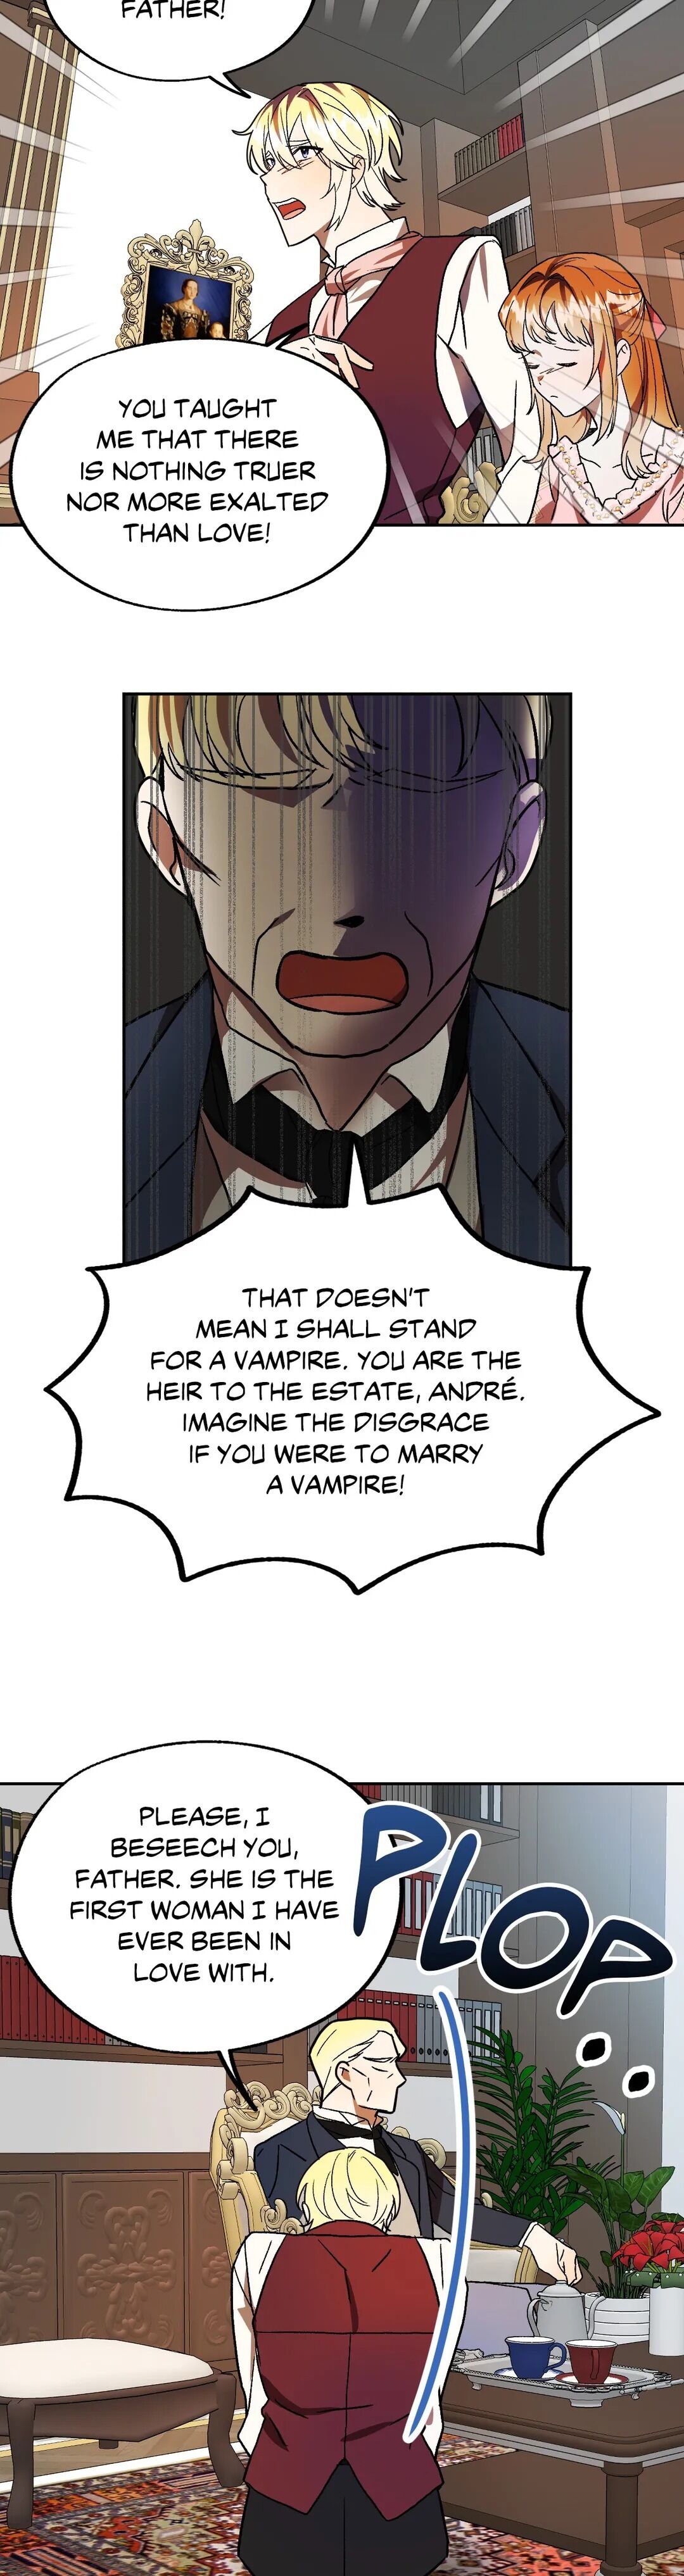 My Fiancée Is A Vampire Hunter! Chapter 41 - Page 1